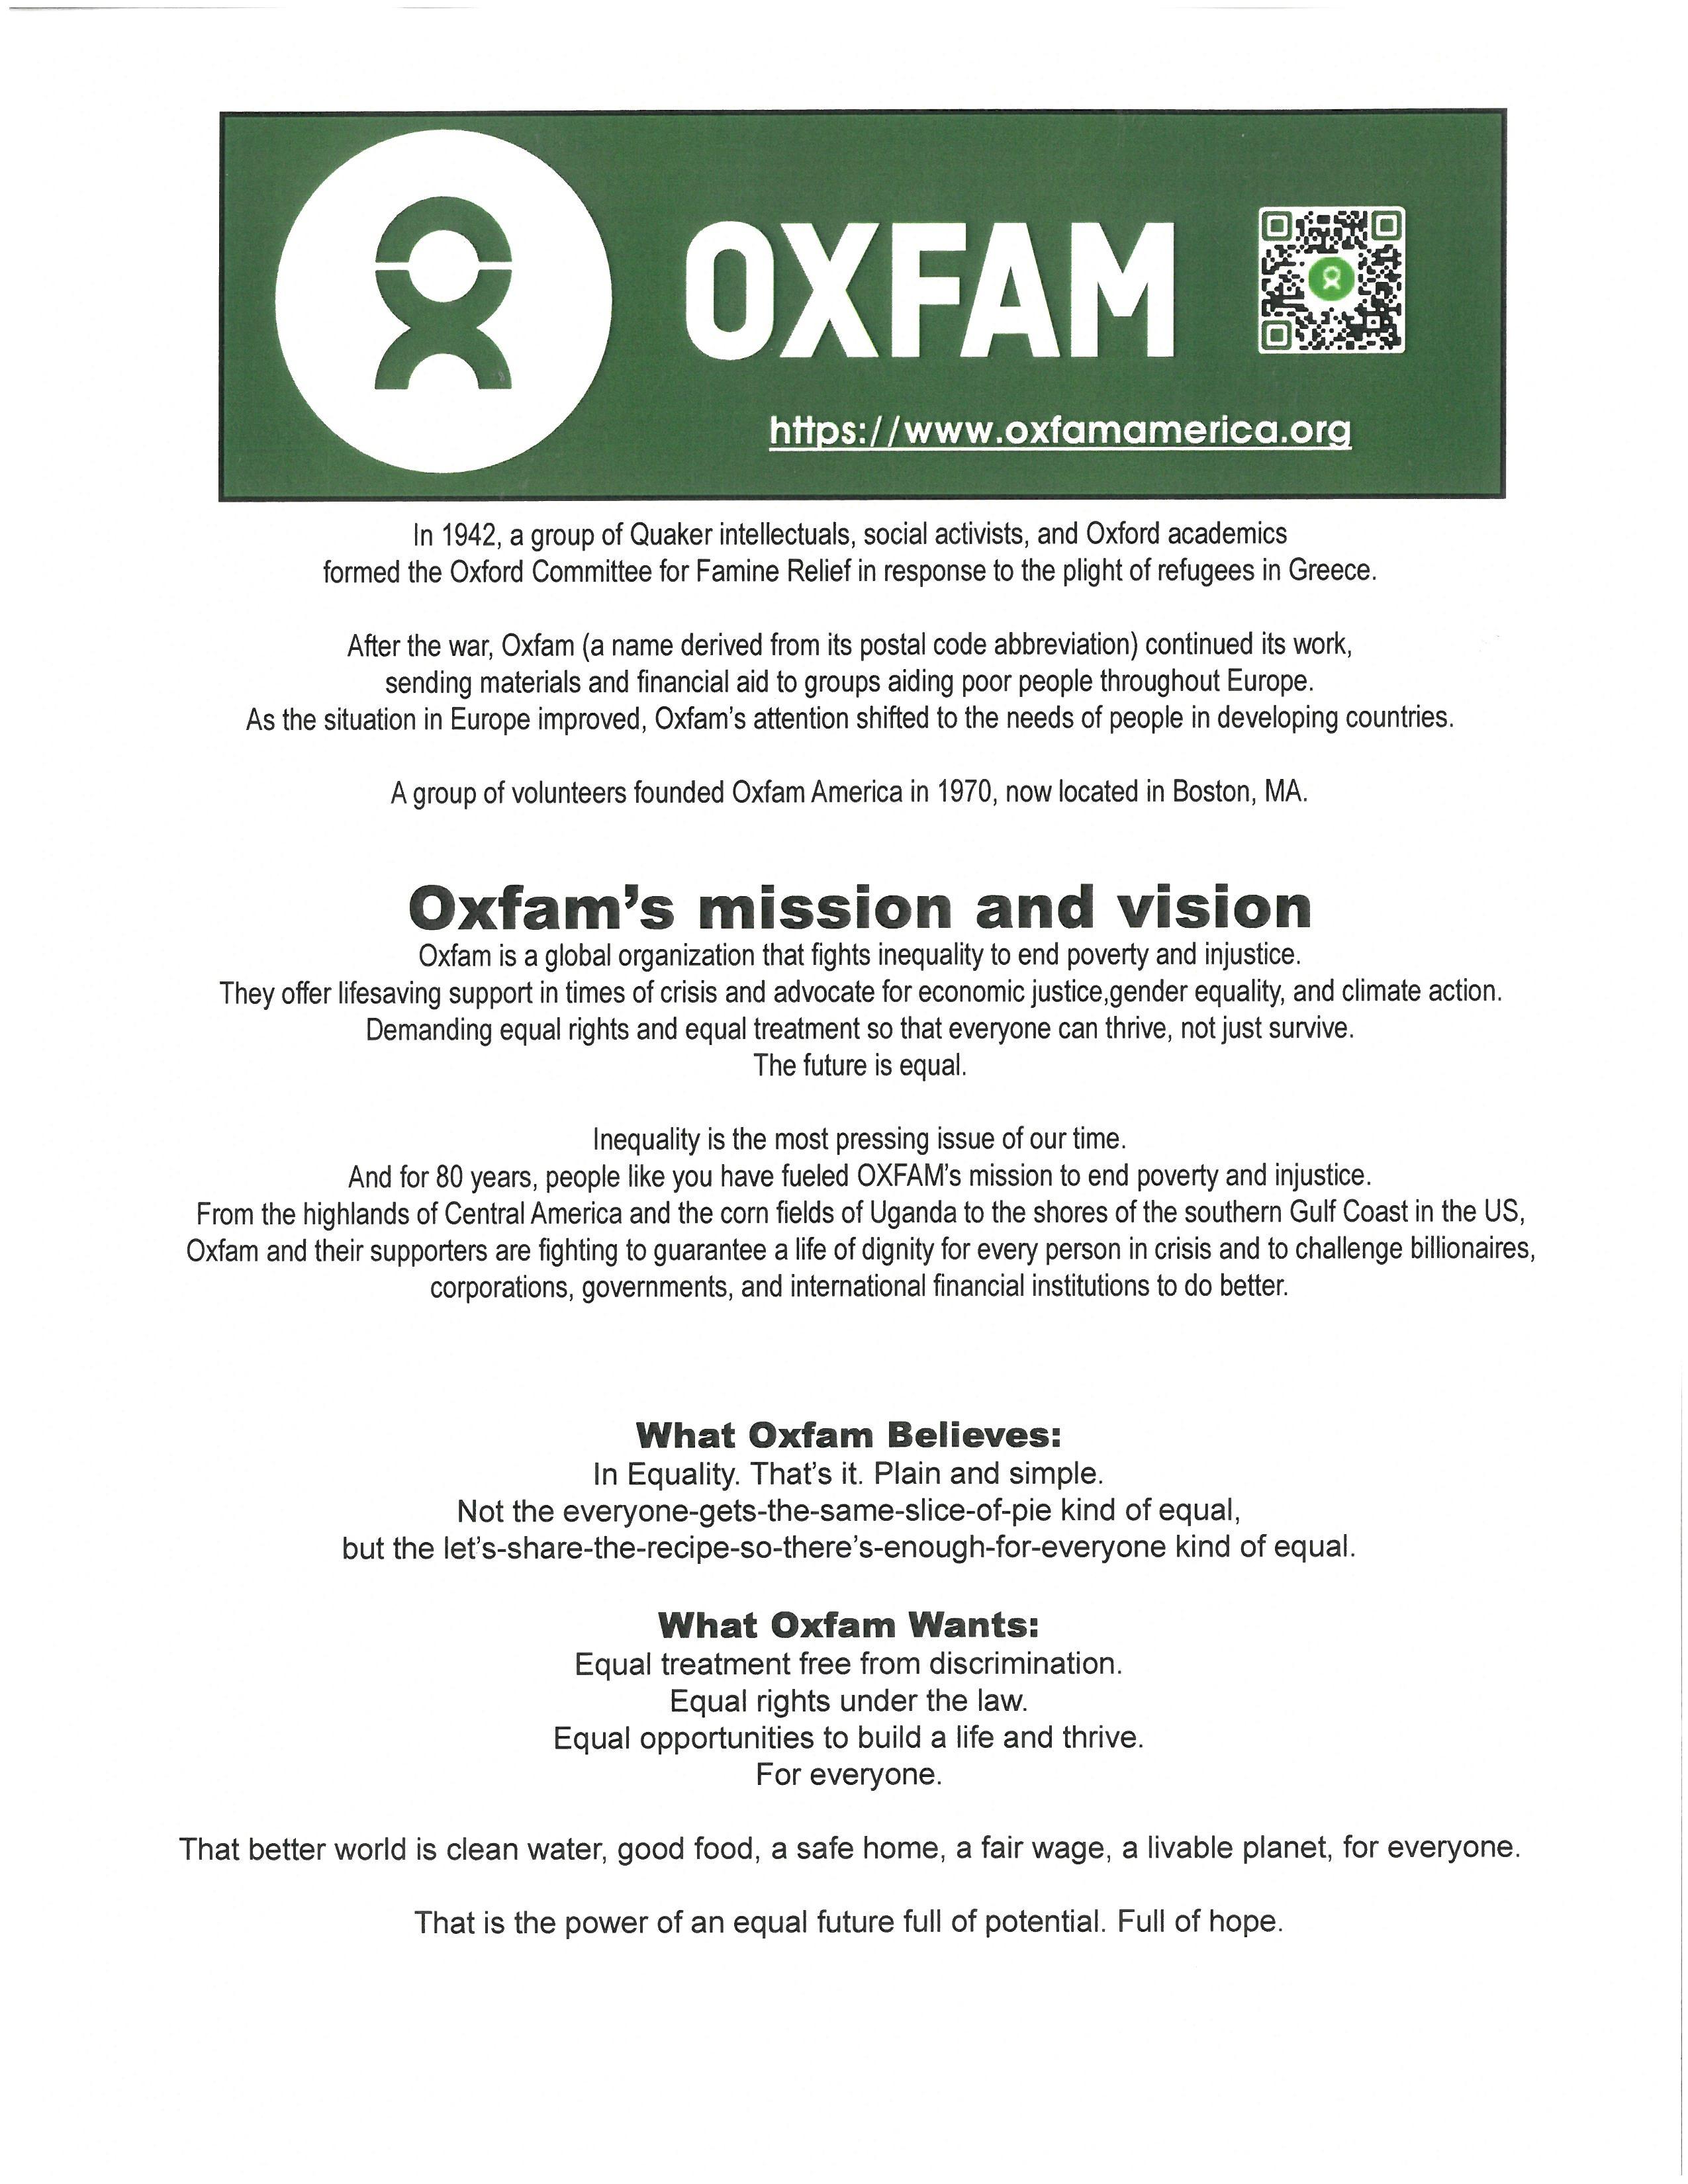 Miss a Meal Beneficiary for SPring 2023 OXFAM America